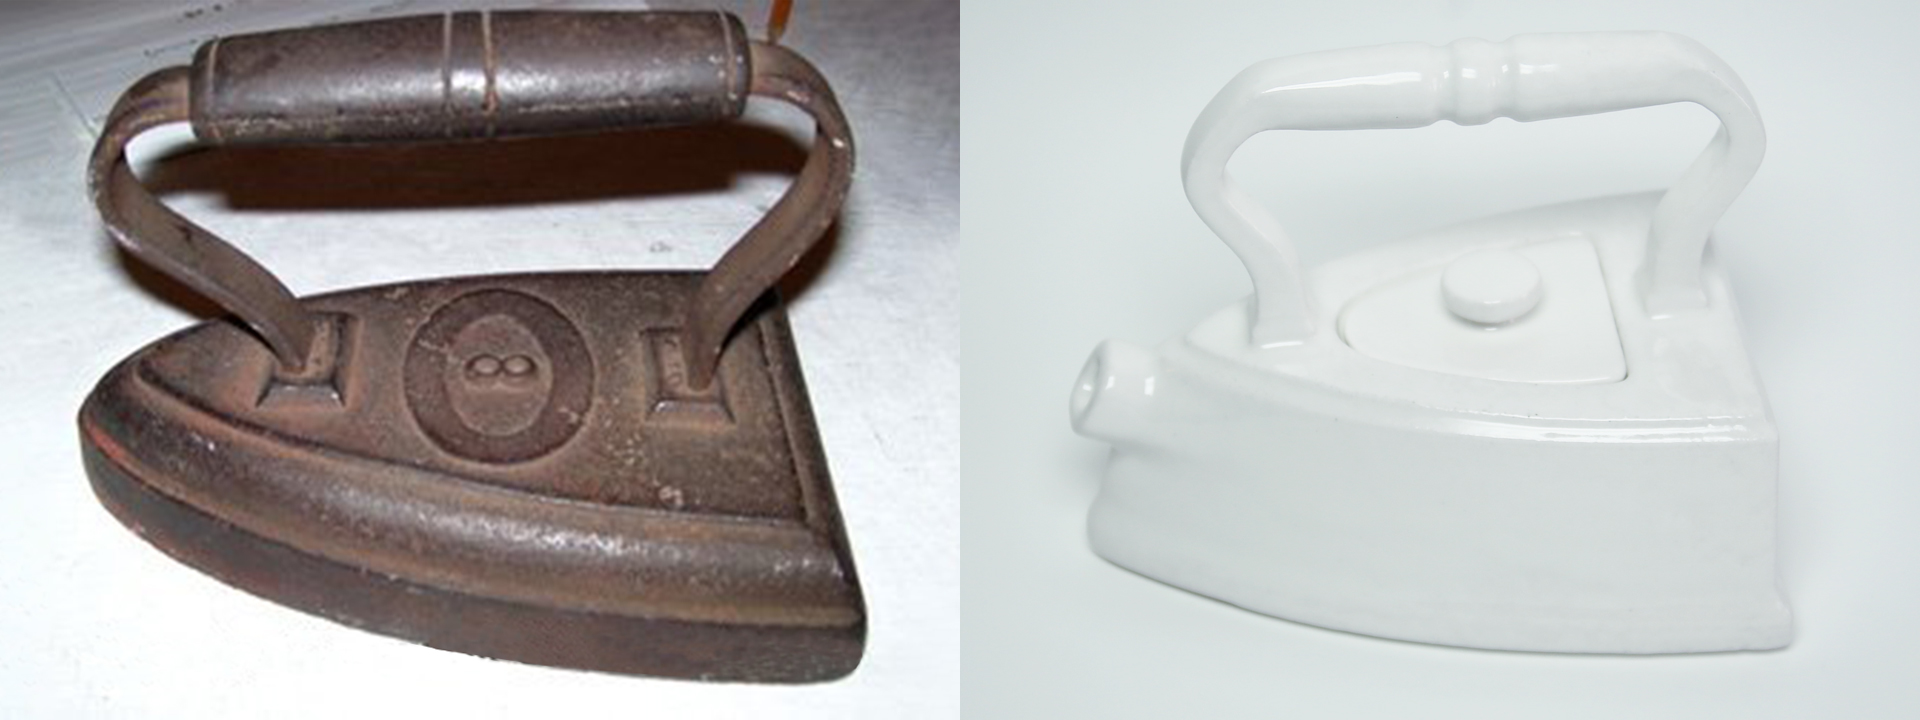 On left, a traditional iron. On right, a tea pot inspired by a traditional iron.